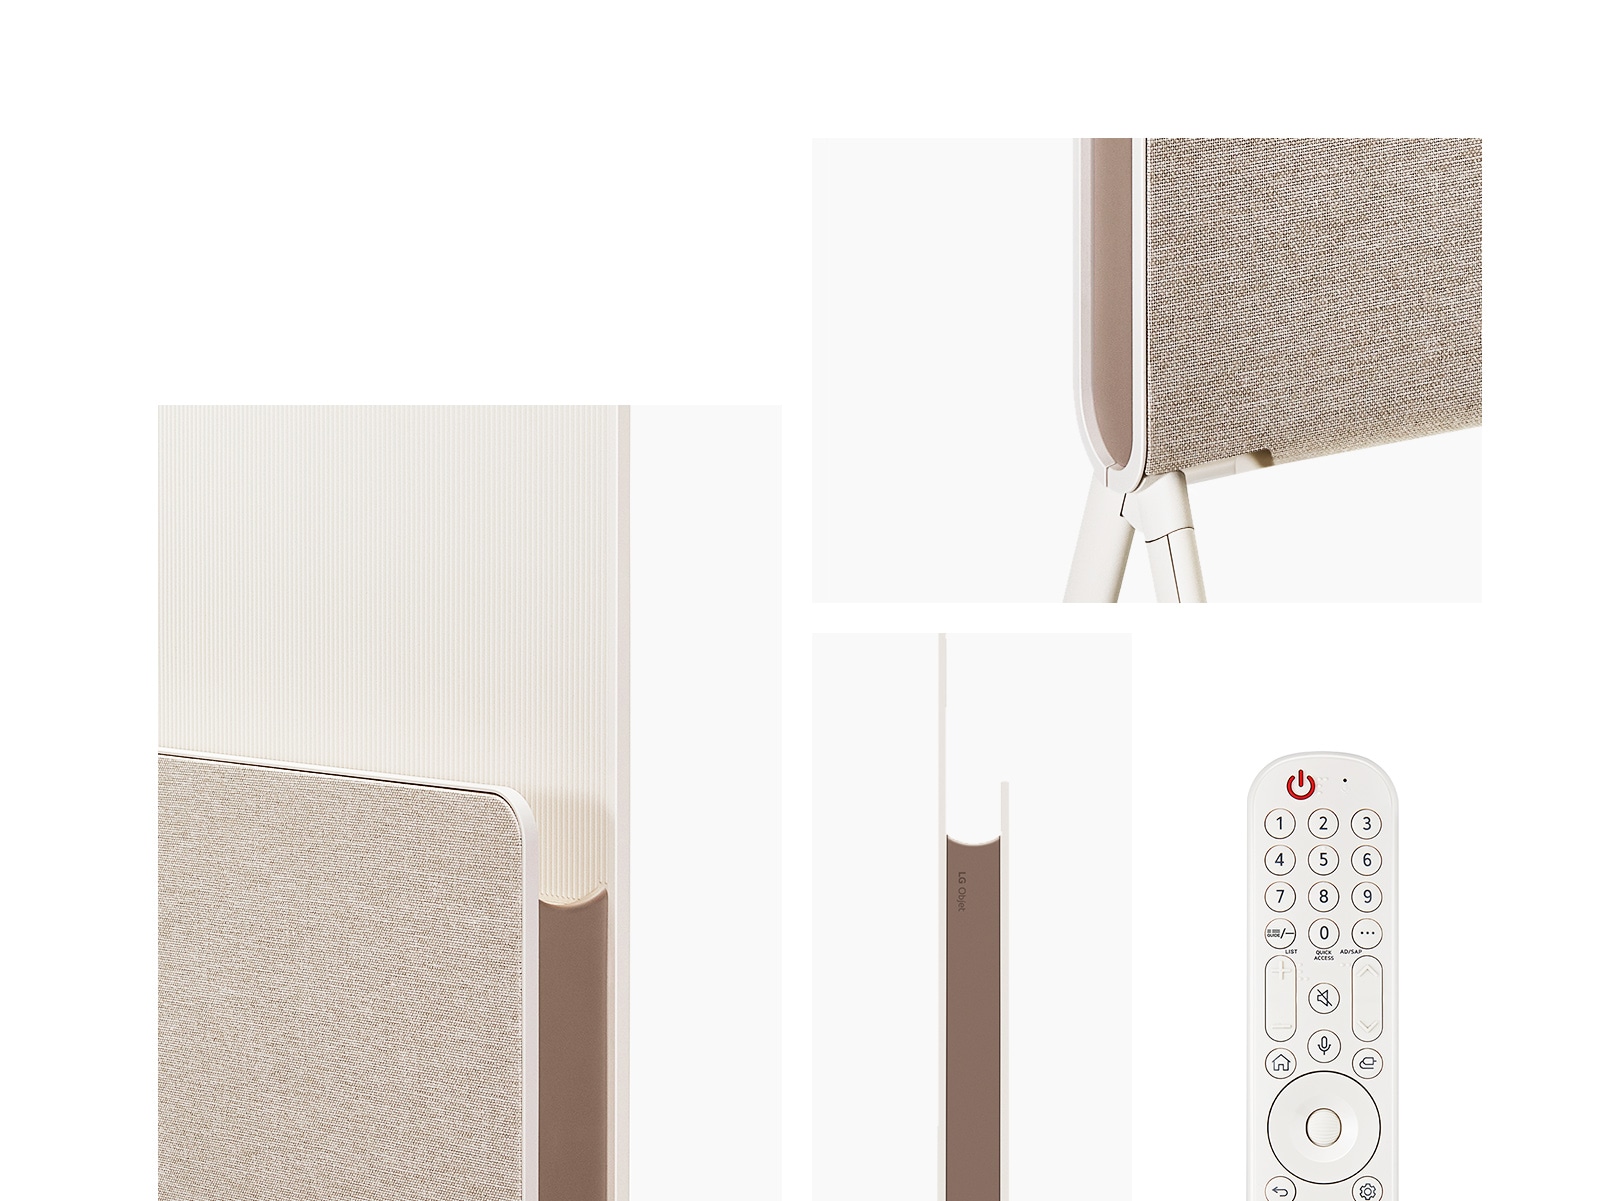 Close-ups of Posé from the back at an angle, and from the side. Partial view of Magic Remote in Beige.